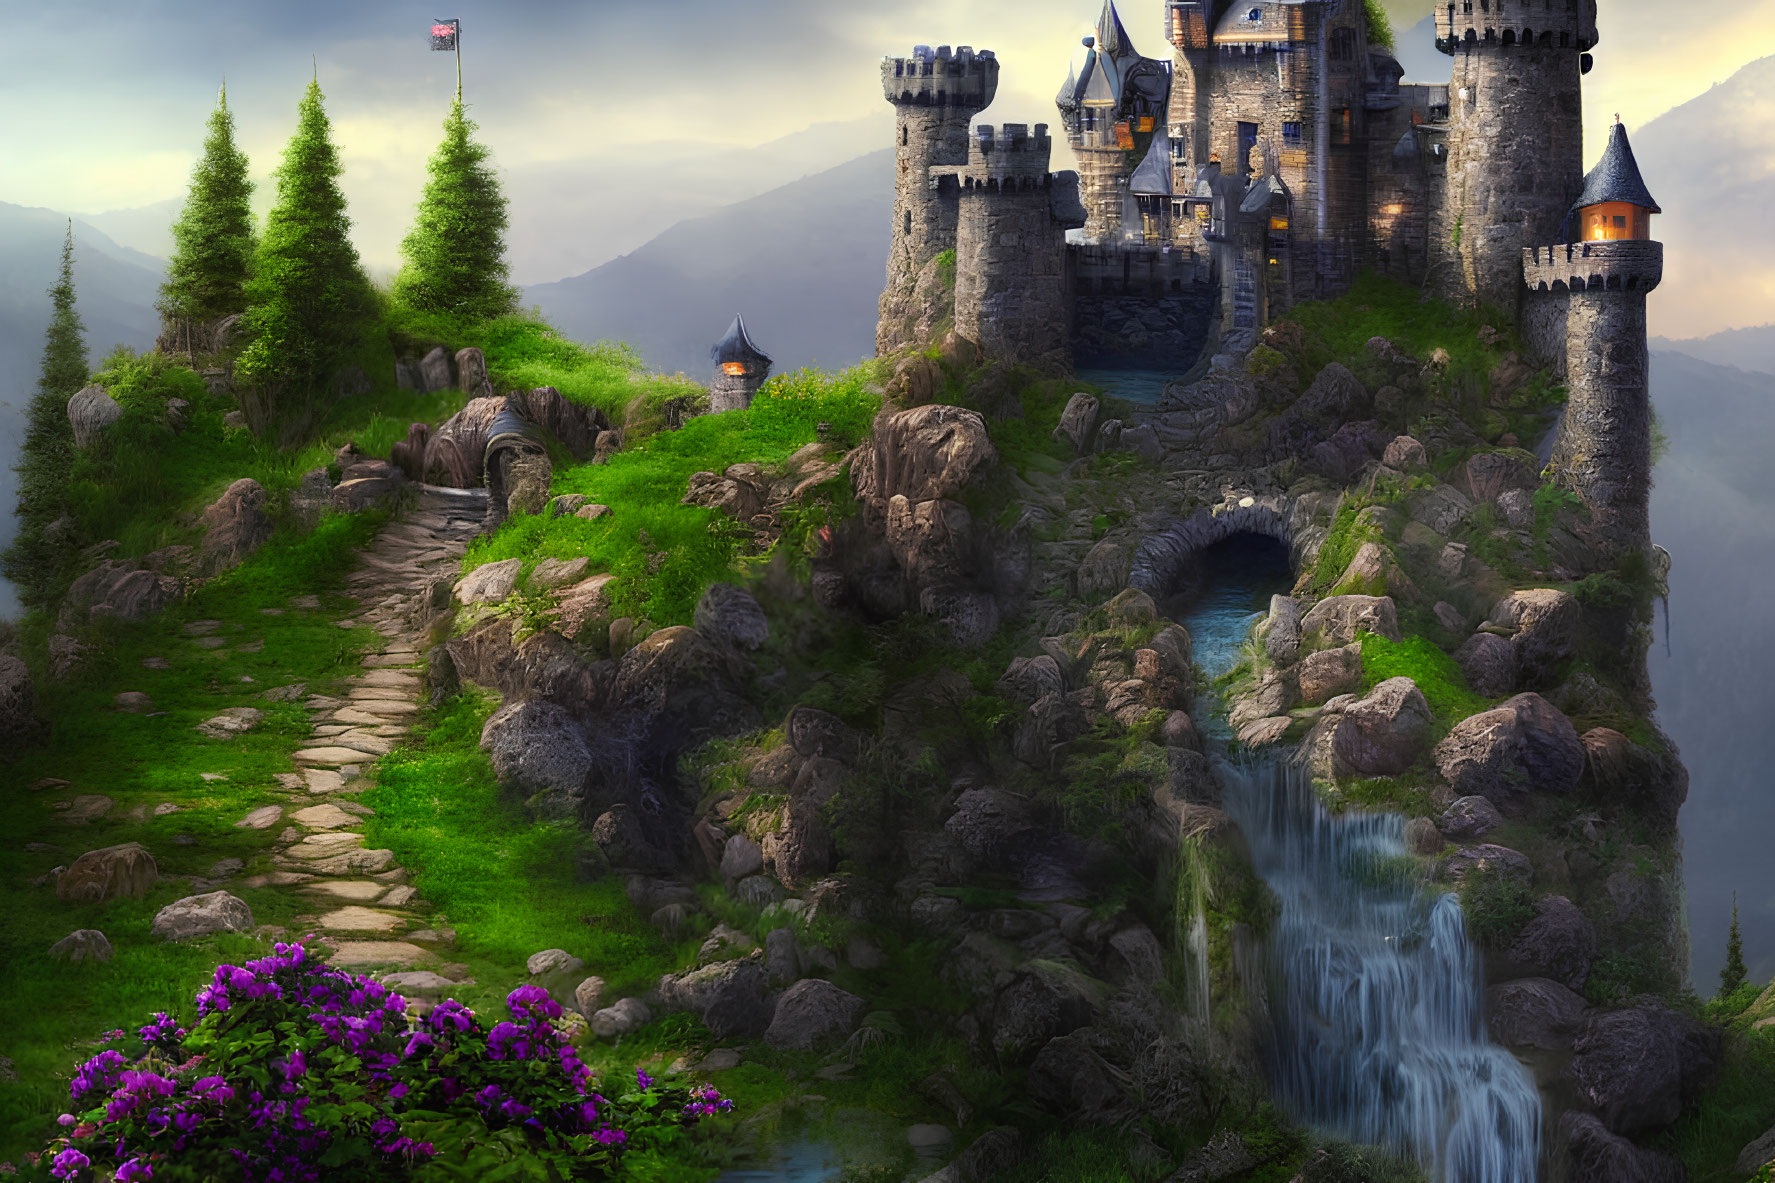 Enchanting fairytale castle on cliff with towers, lush greenery, waterfall, and stone